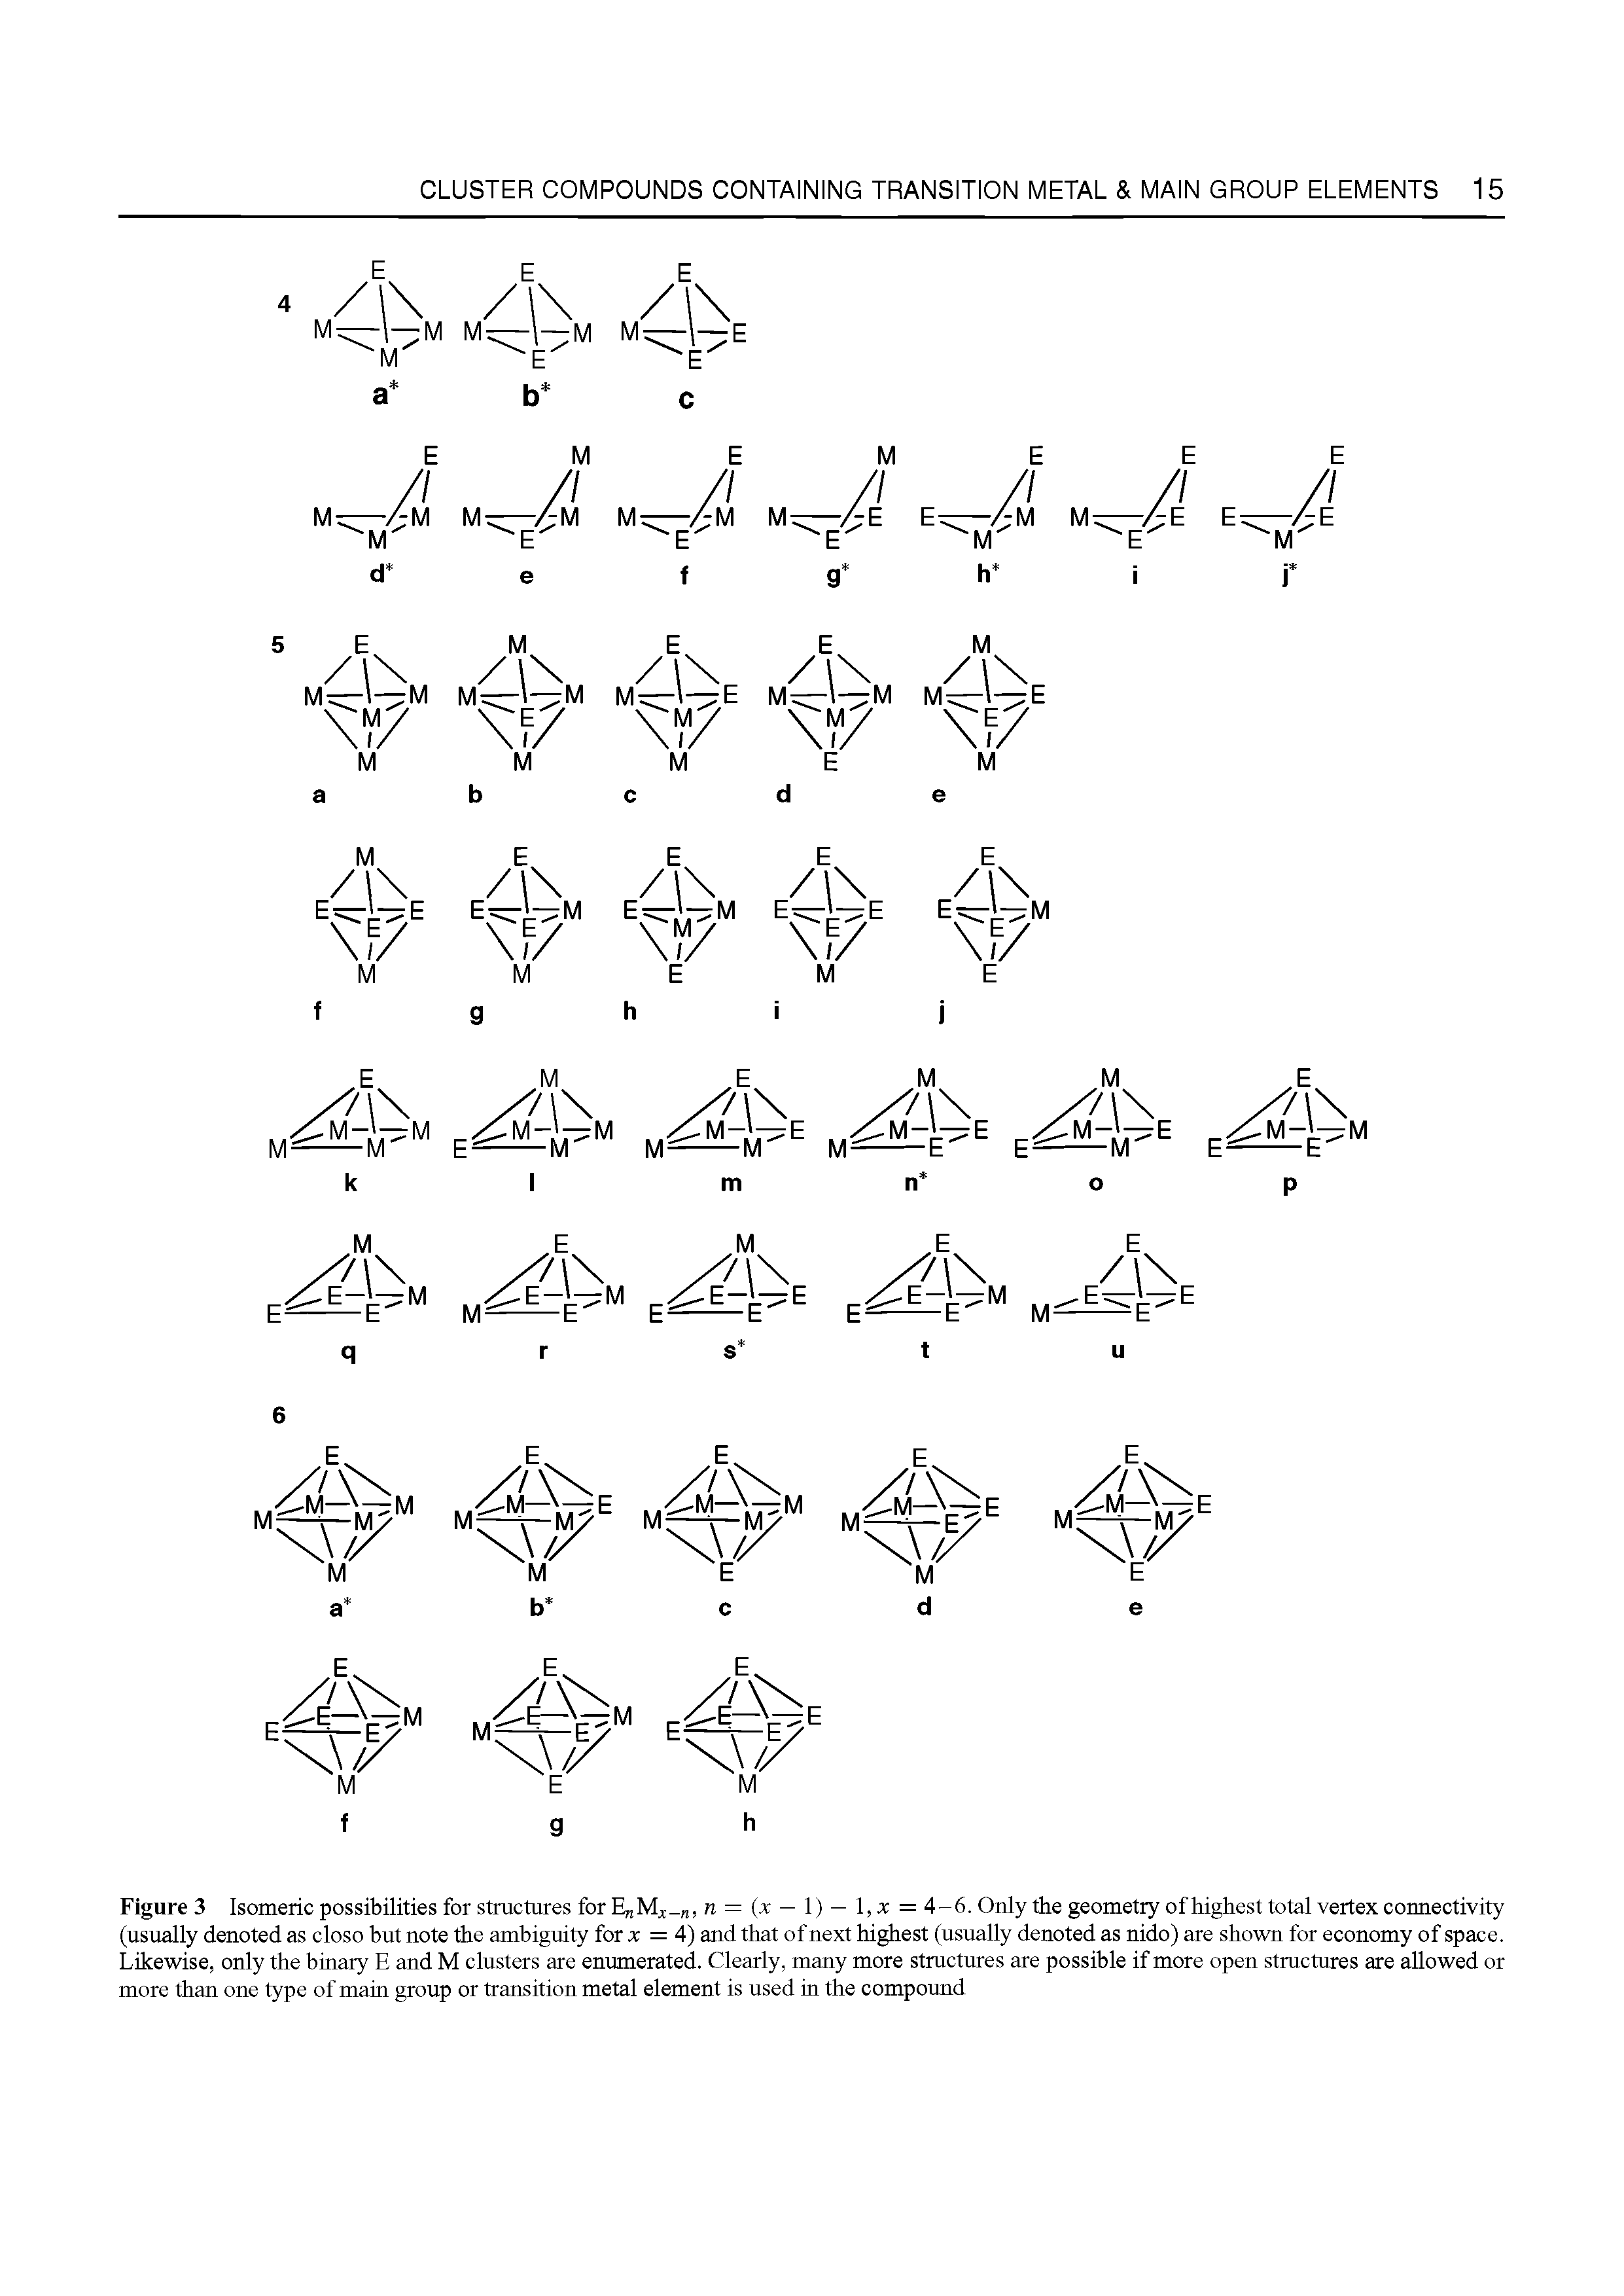 Figure 3 Isomeric possibilities for structures for E Mx-n, n = (x — 1) — l,x = 4-6. Only the geometry of highest total vertex connectivity (usually denoted as closo but note the ambiguity for x = 4) and that of next highest (usually denoted as nido) are shown for economy of space. Likewise, only the binary E and M clusters are enumerated. Clearly, many more structures are possible if more open structures are allowed or more than one type of main group or transition metal element is used in the compound...